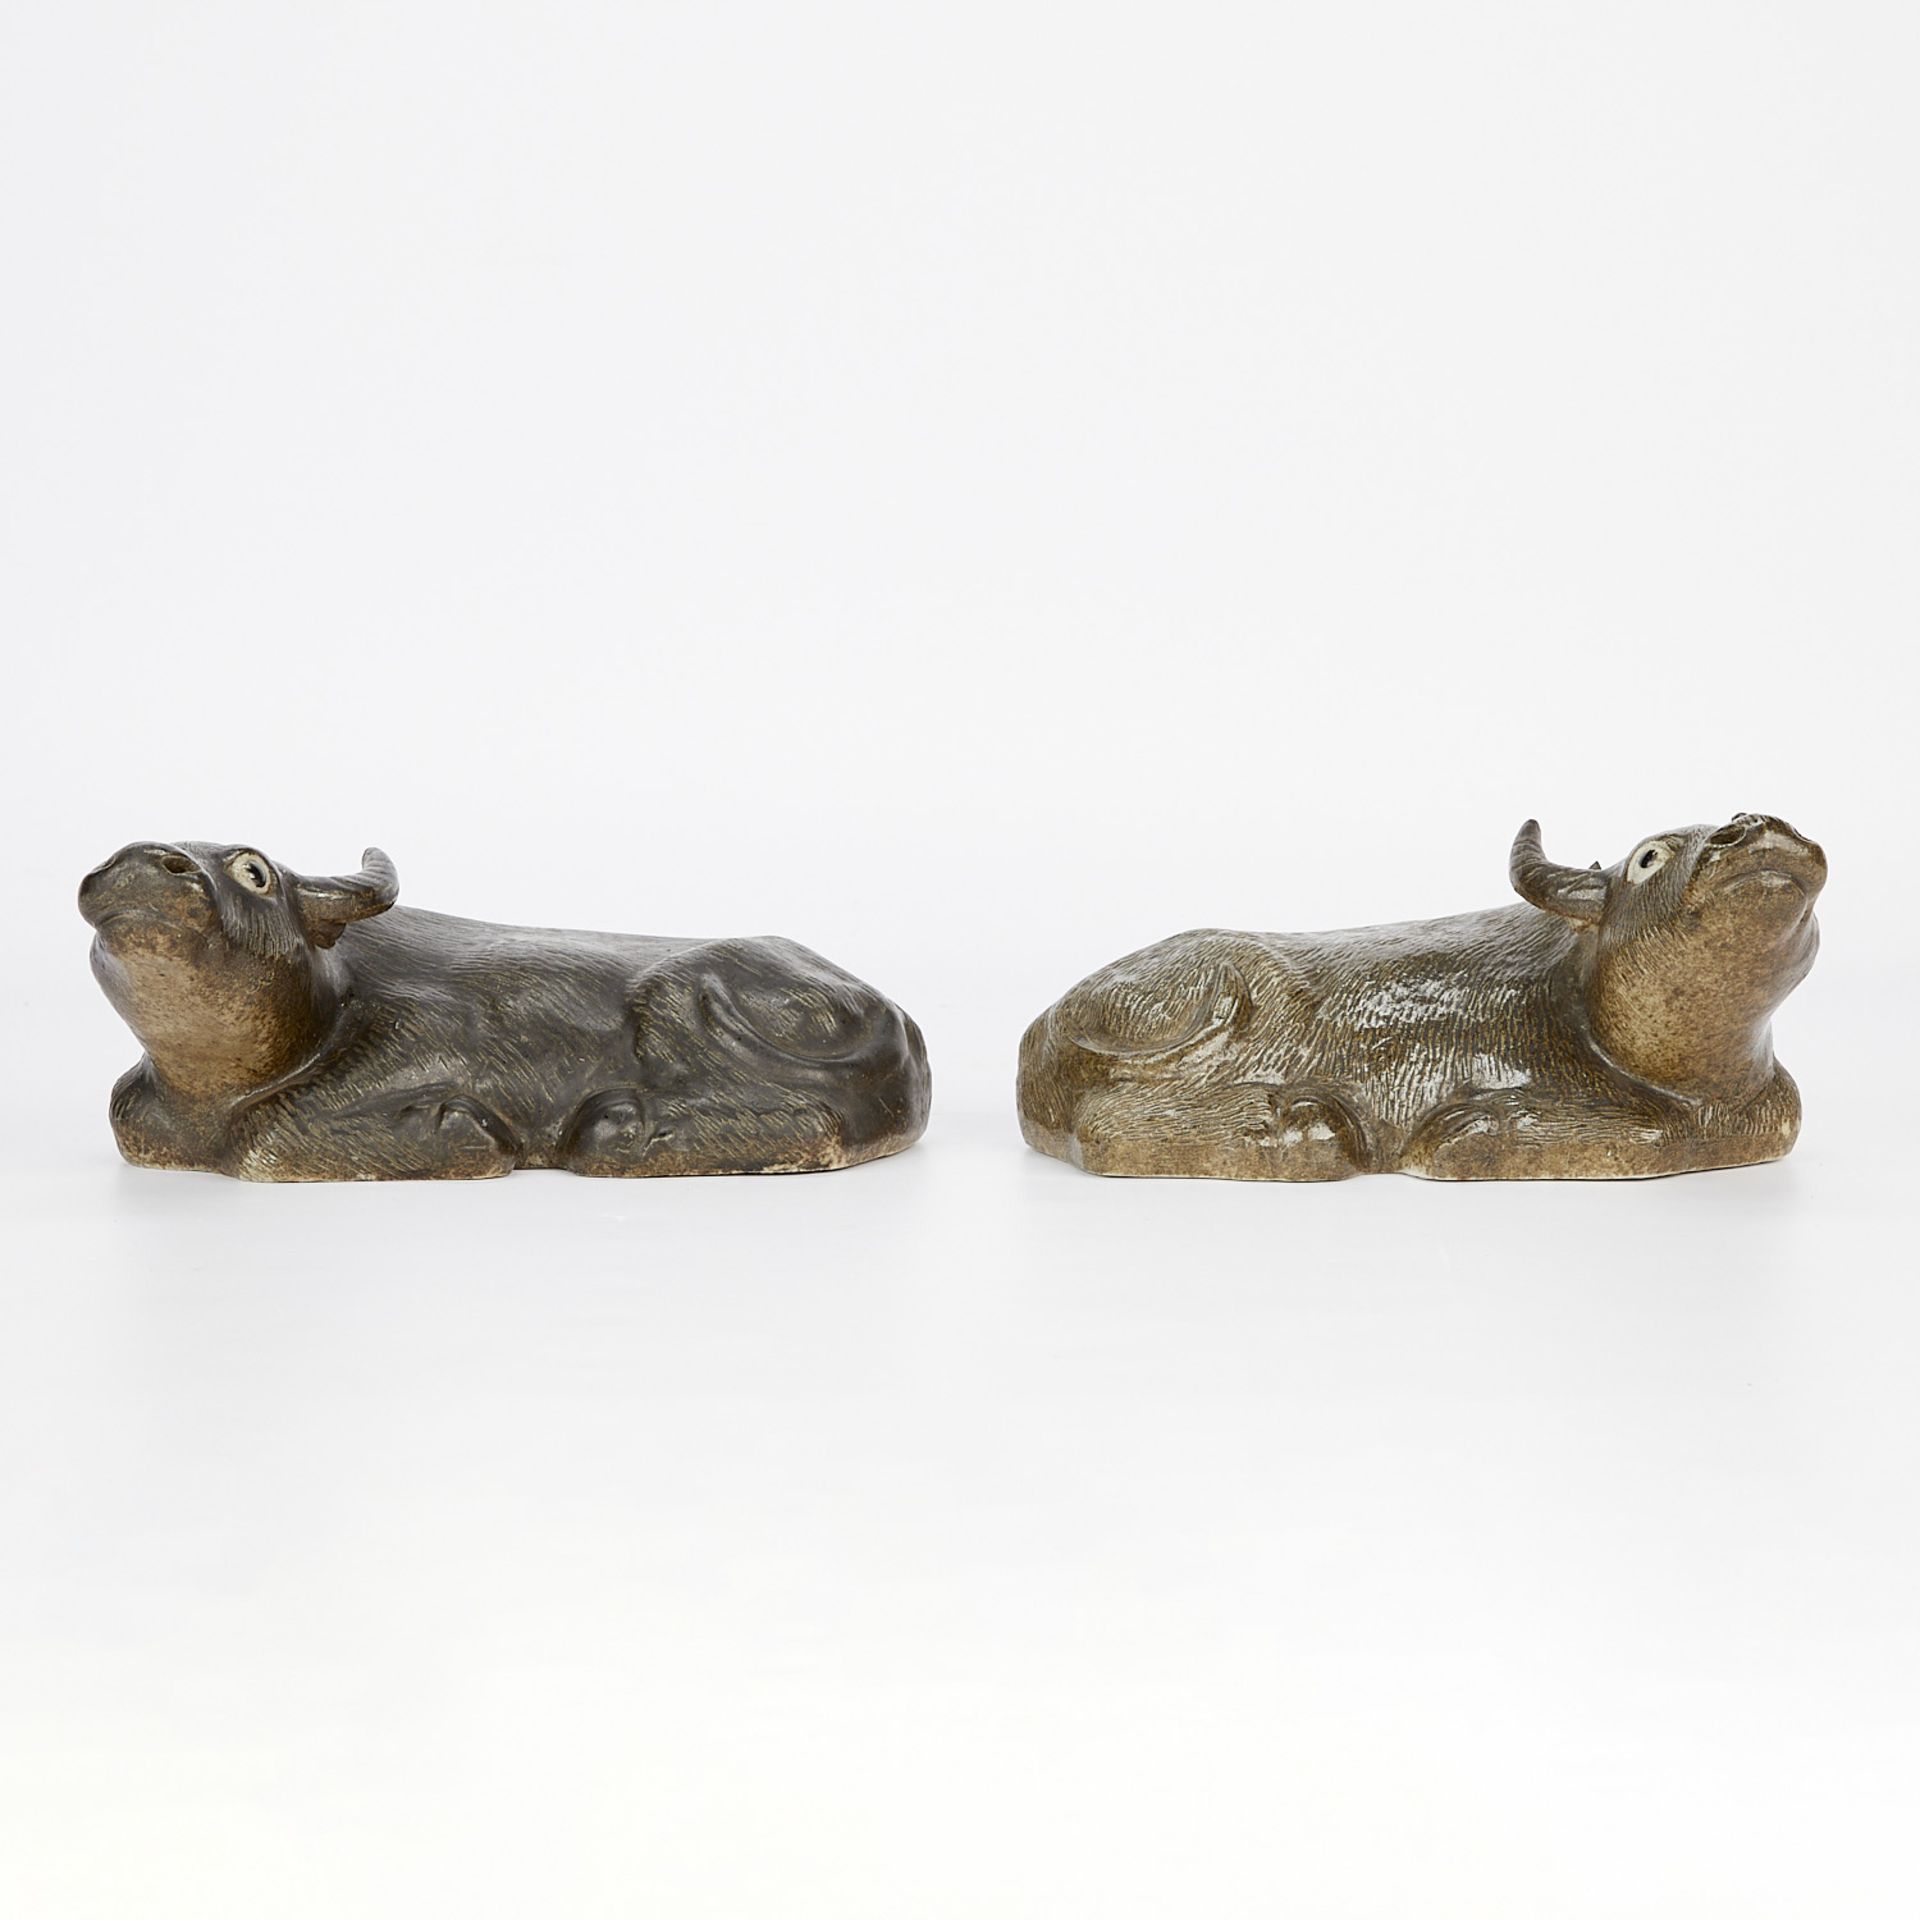 Pair of Antique Chinese Ceramic Water Buffalos - Image 4 of 13